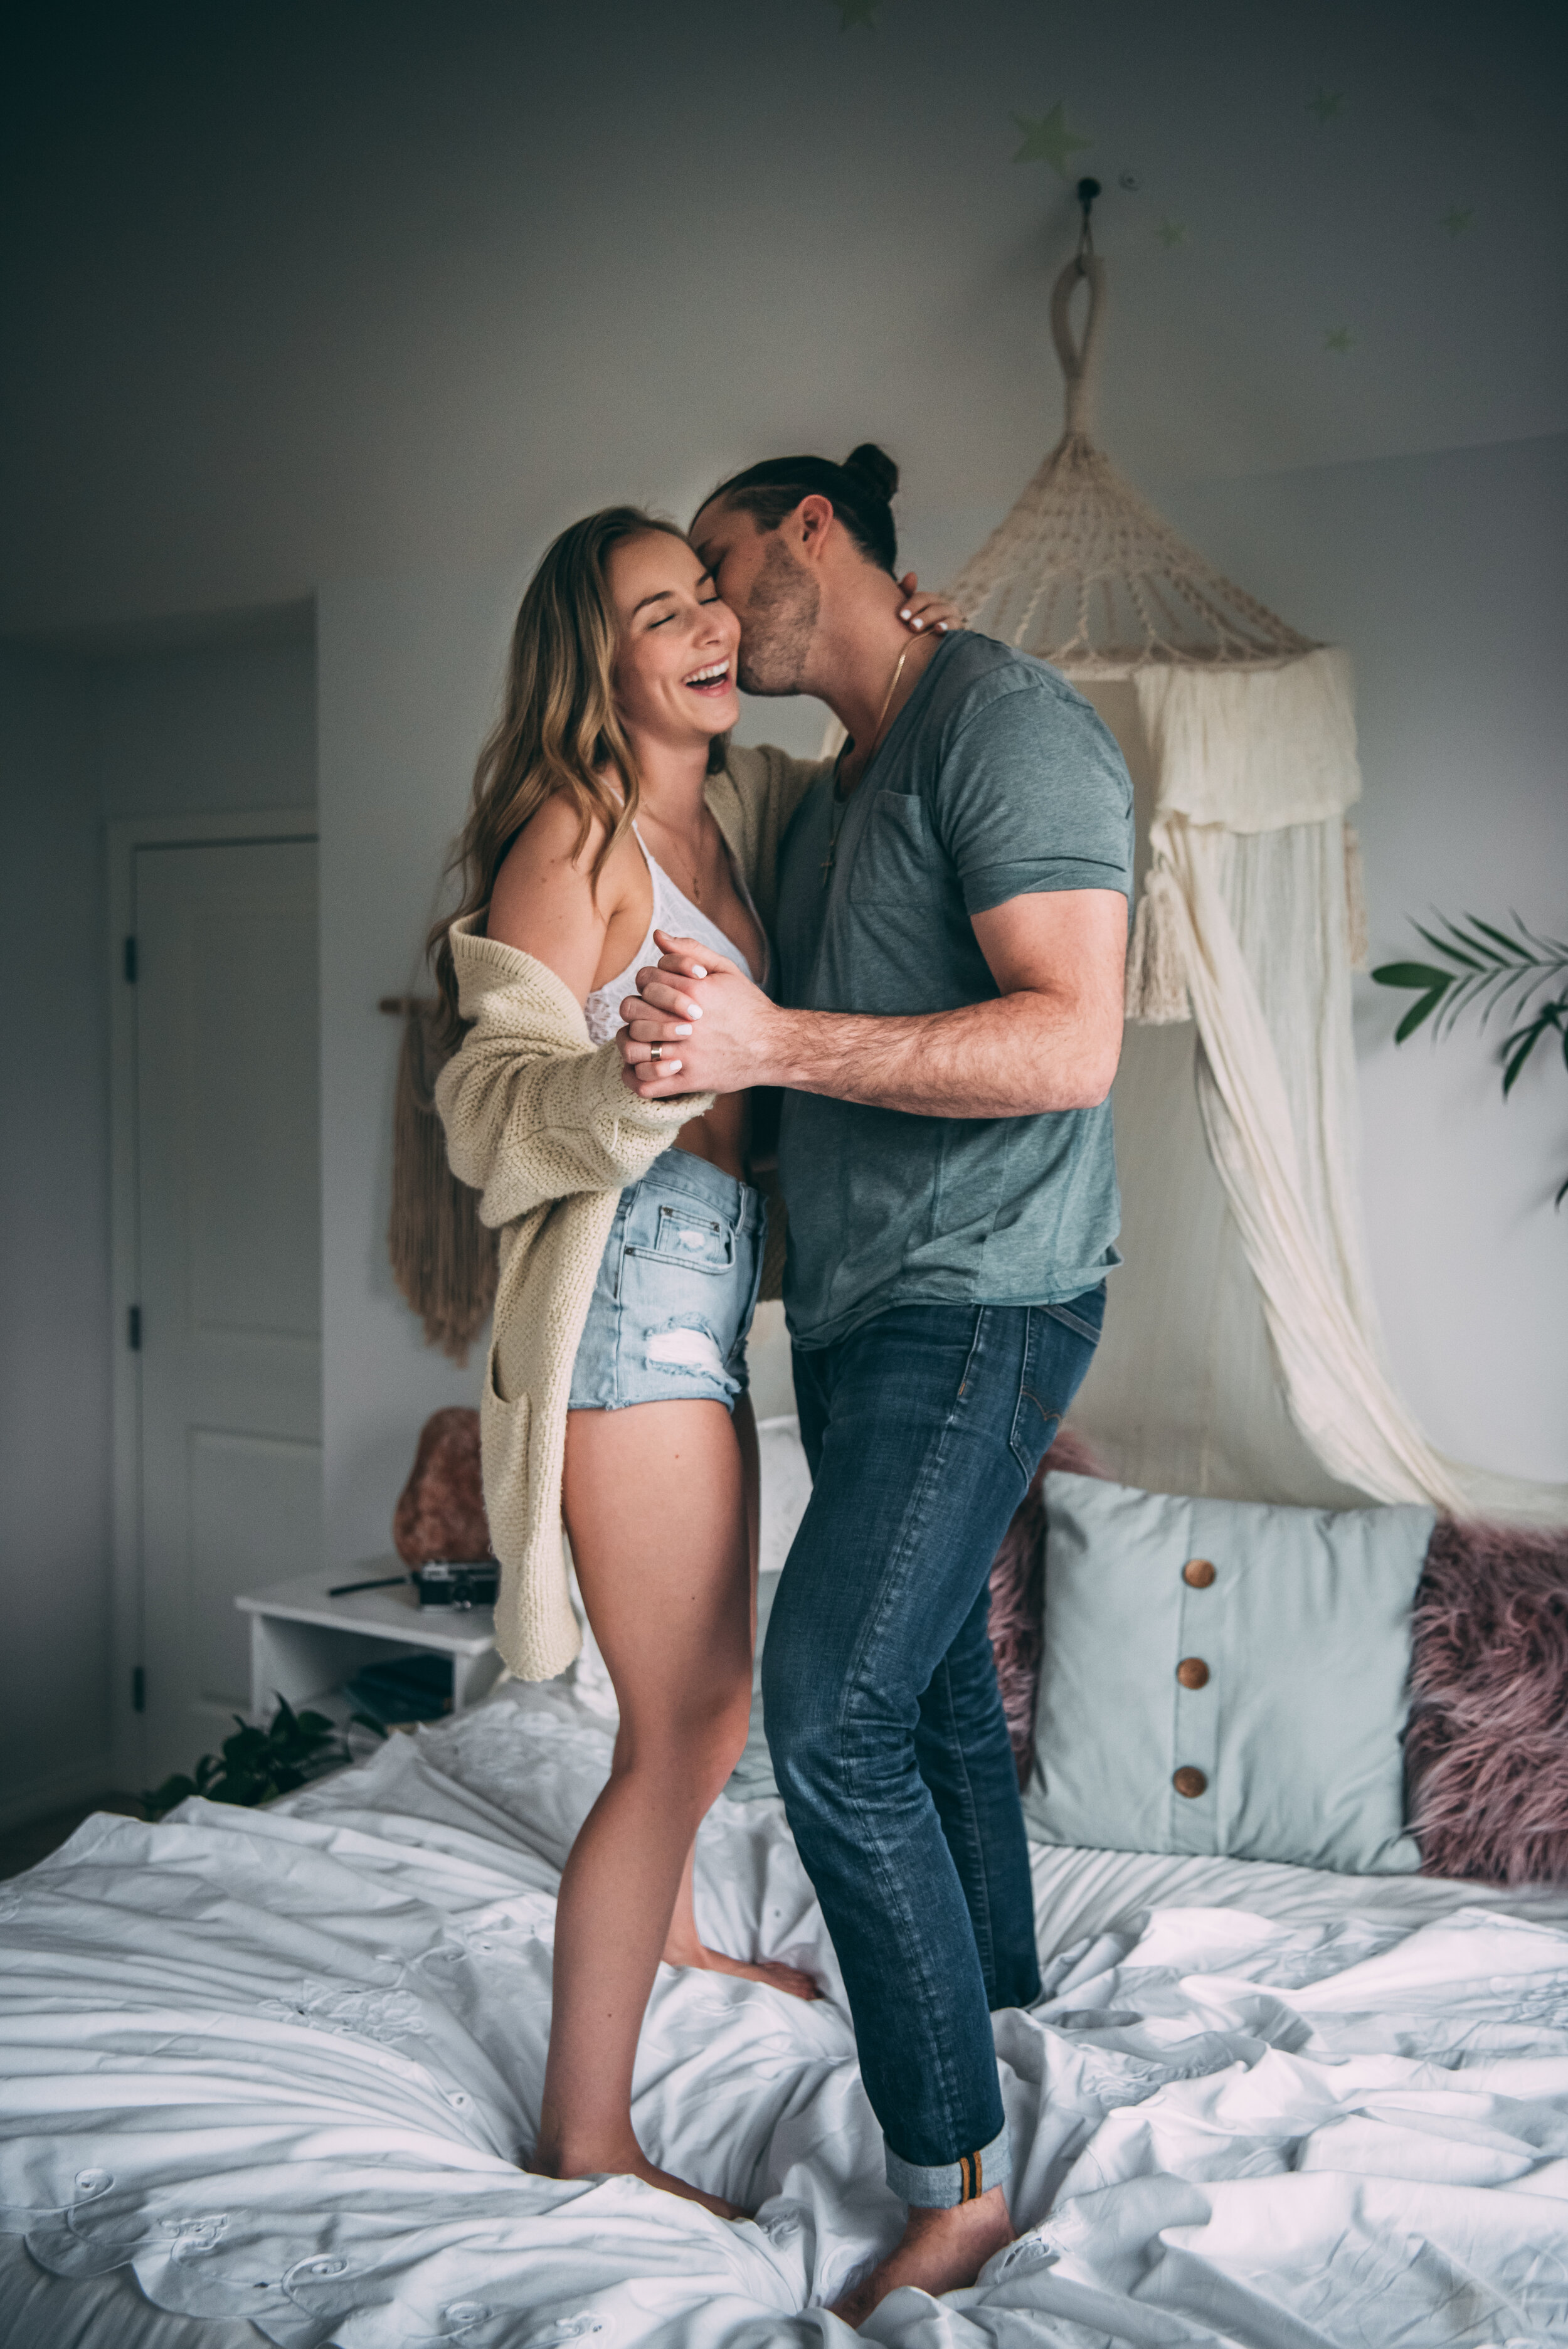 Sechelt BC Engagement Session - In Home Couples Session - Laura Olson Photography - Sunshine Coast BC & Vancouver Wedding & Elopement Photographer-4877.jpg